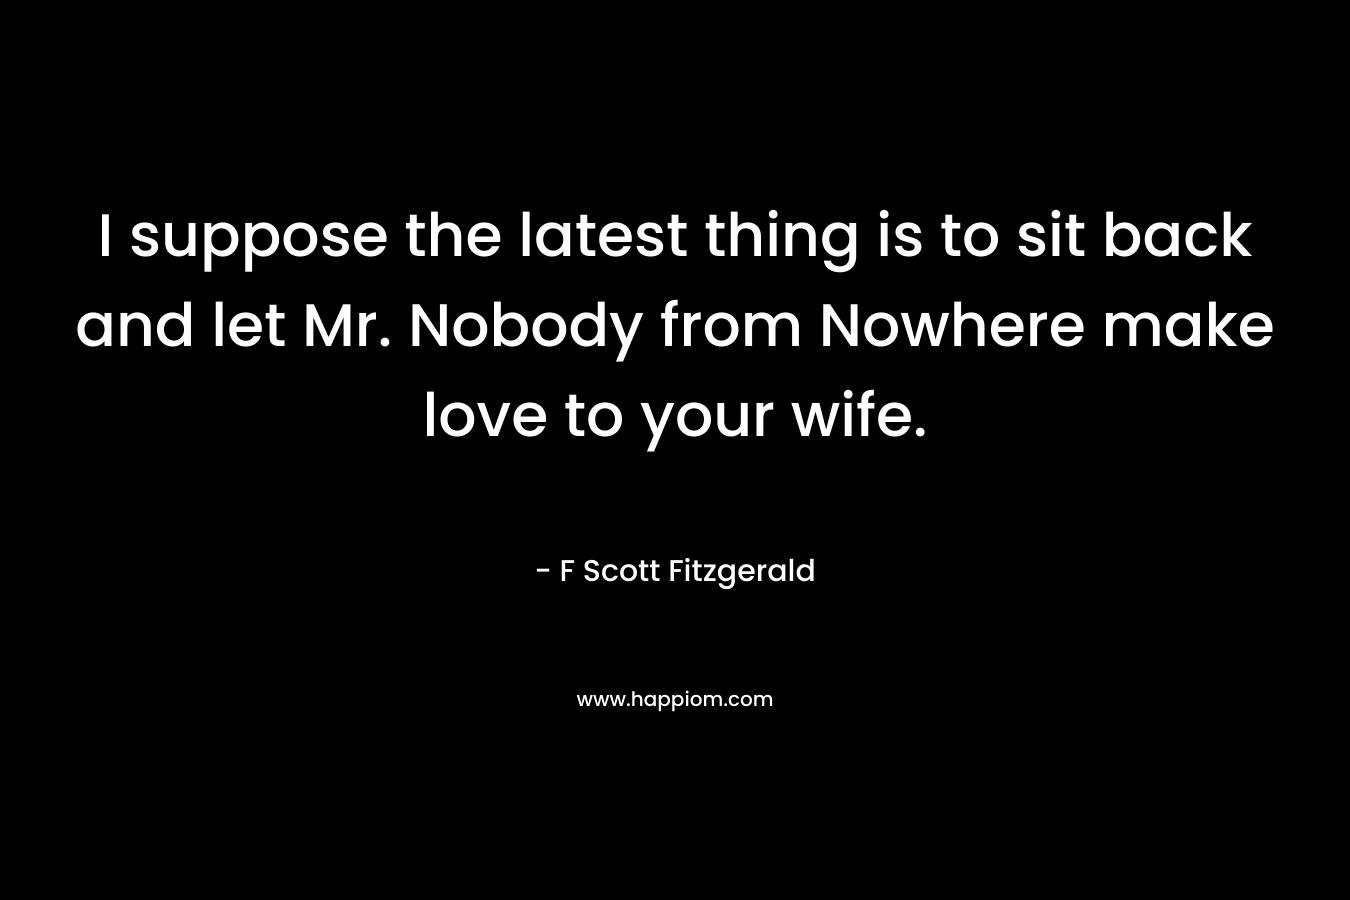 I suppose the latest thing is to sit back and let Mr. Nobody from Nowhere make love to your wife.